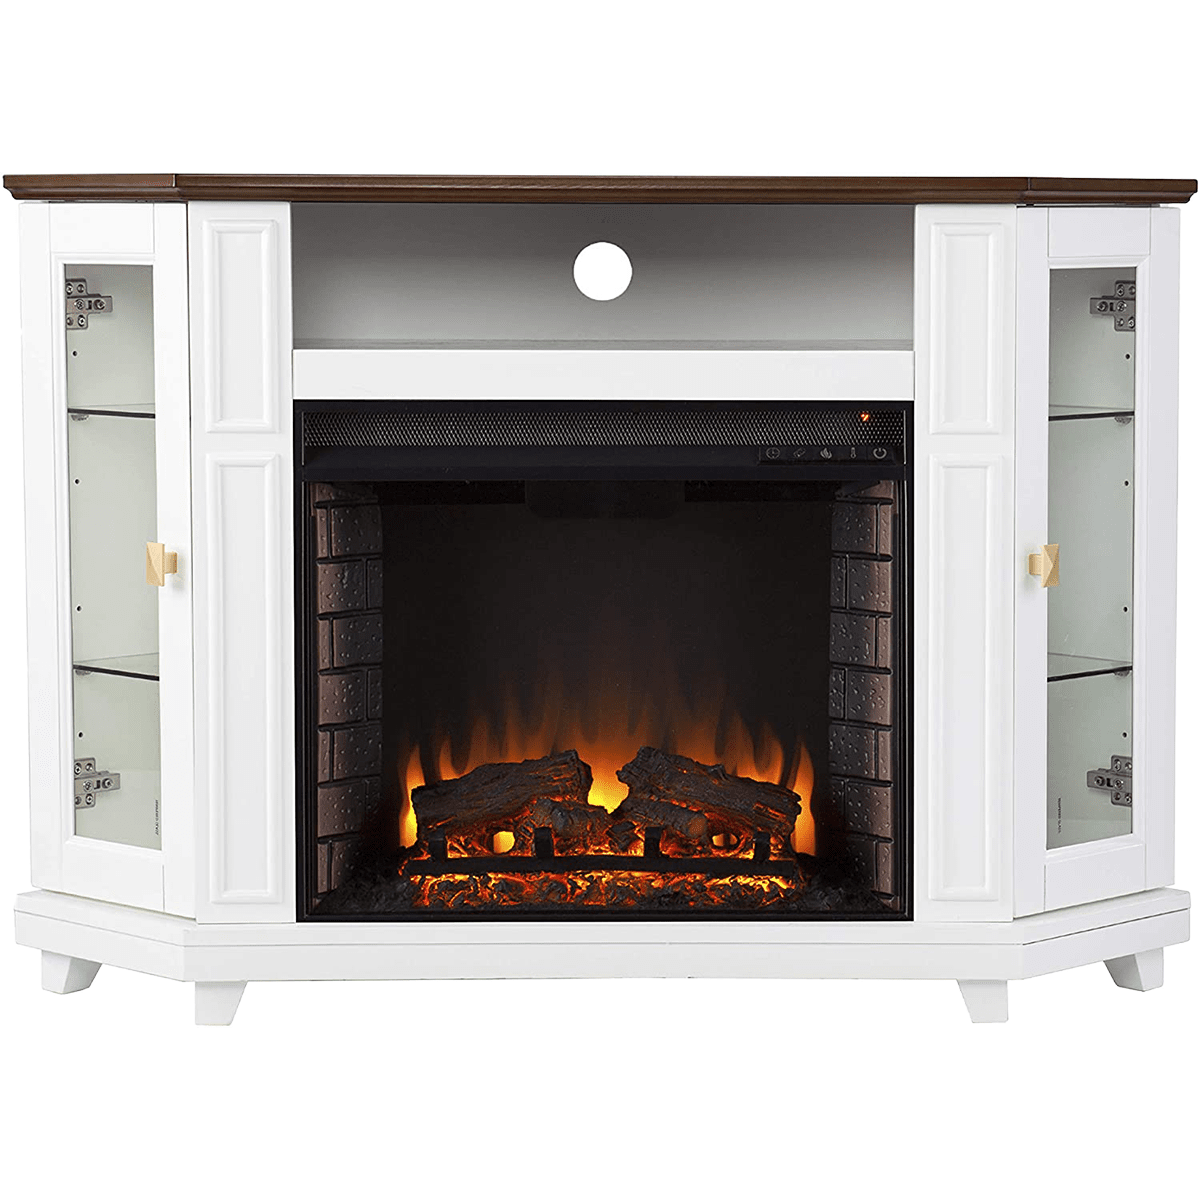 Southern Enterprises Dilvon Electric Fireplace TV Stand - Standard